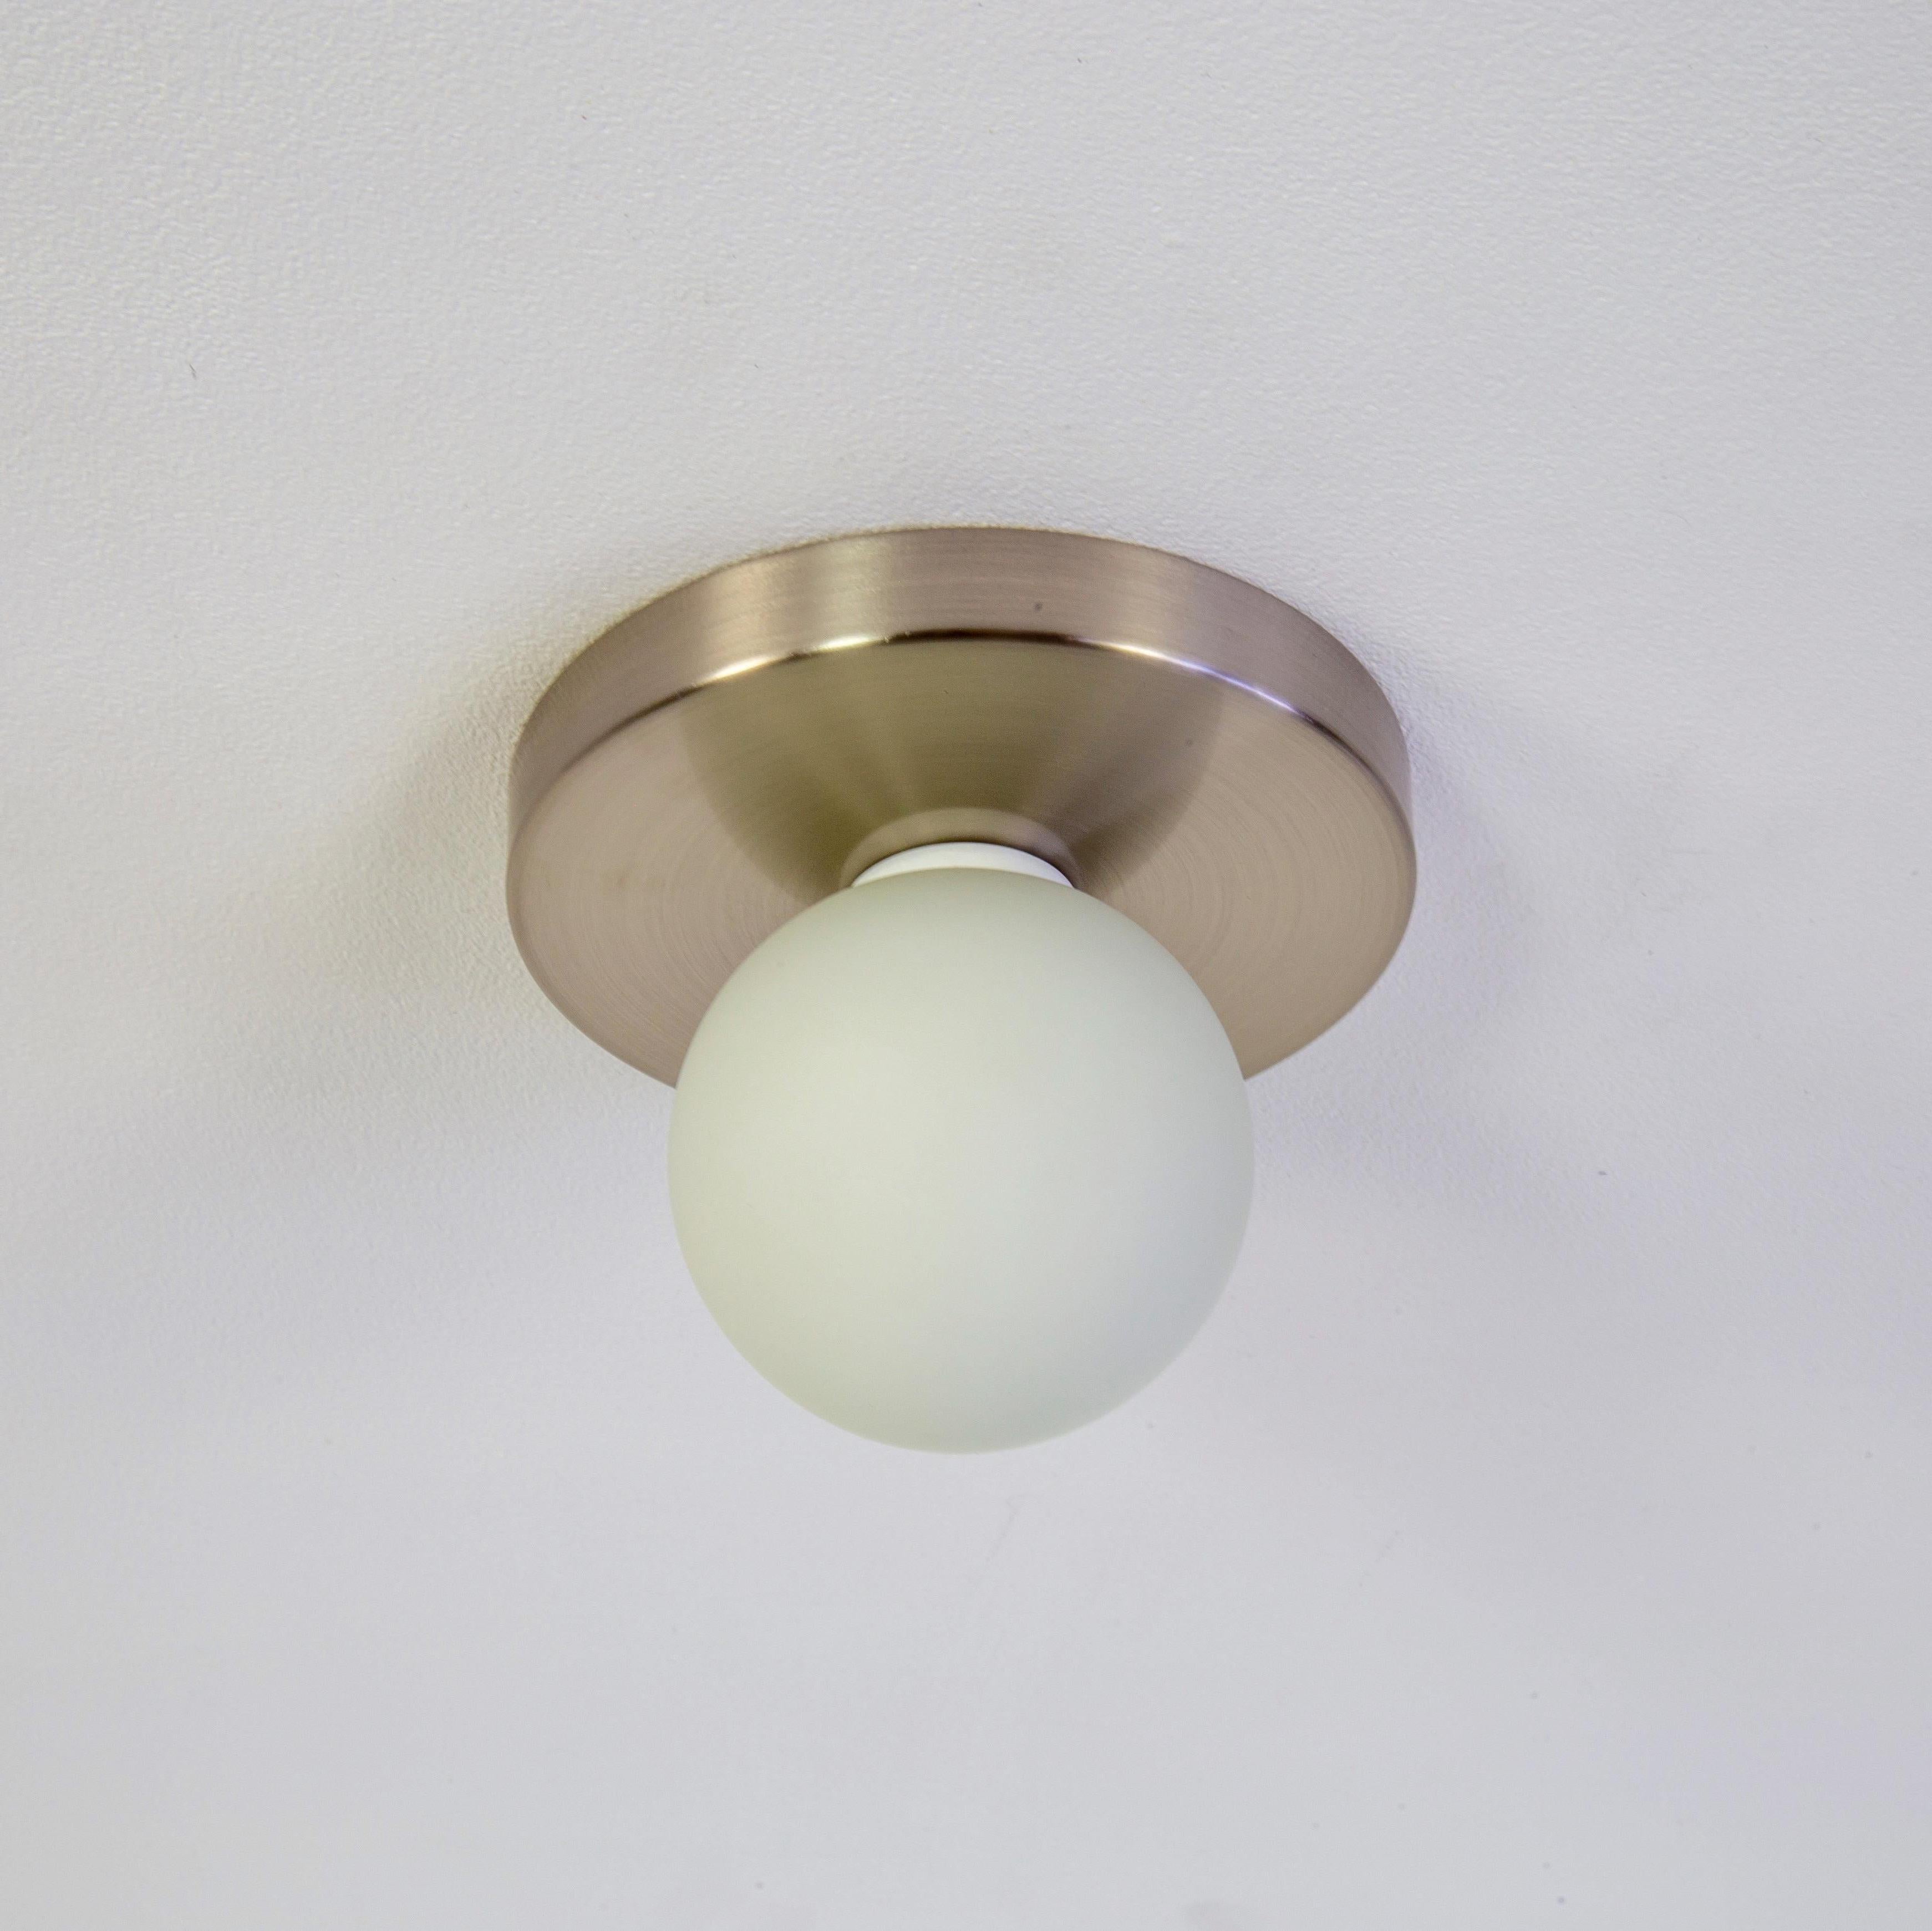 Plated Set of 4 Globe Flush Mounts by Research.Lighting, Brushed Nickel, Made to Order For Sale